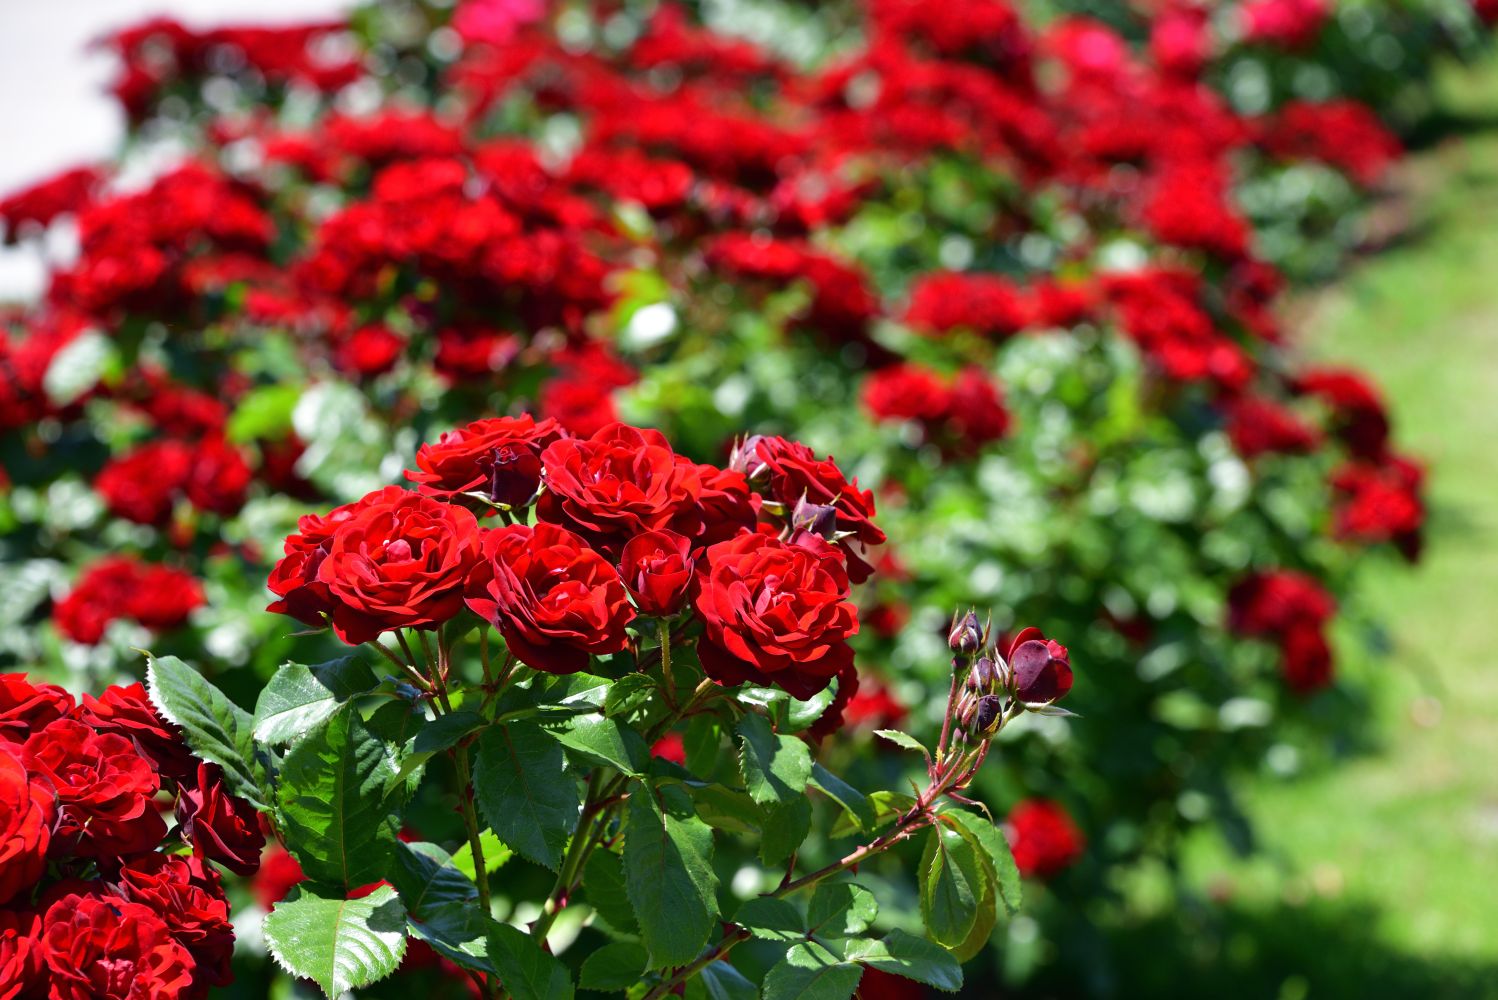 7 Ways To Grow Roses In Your Garden In Victoria, BC